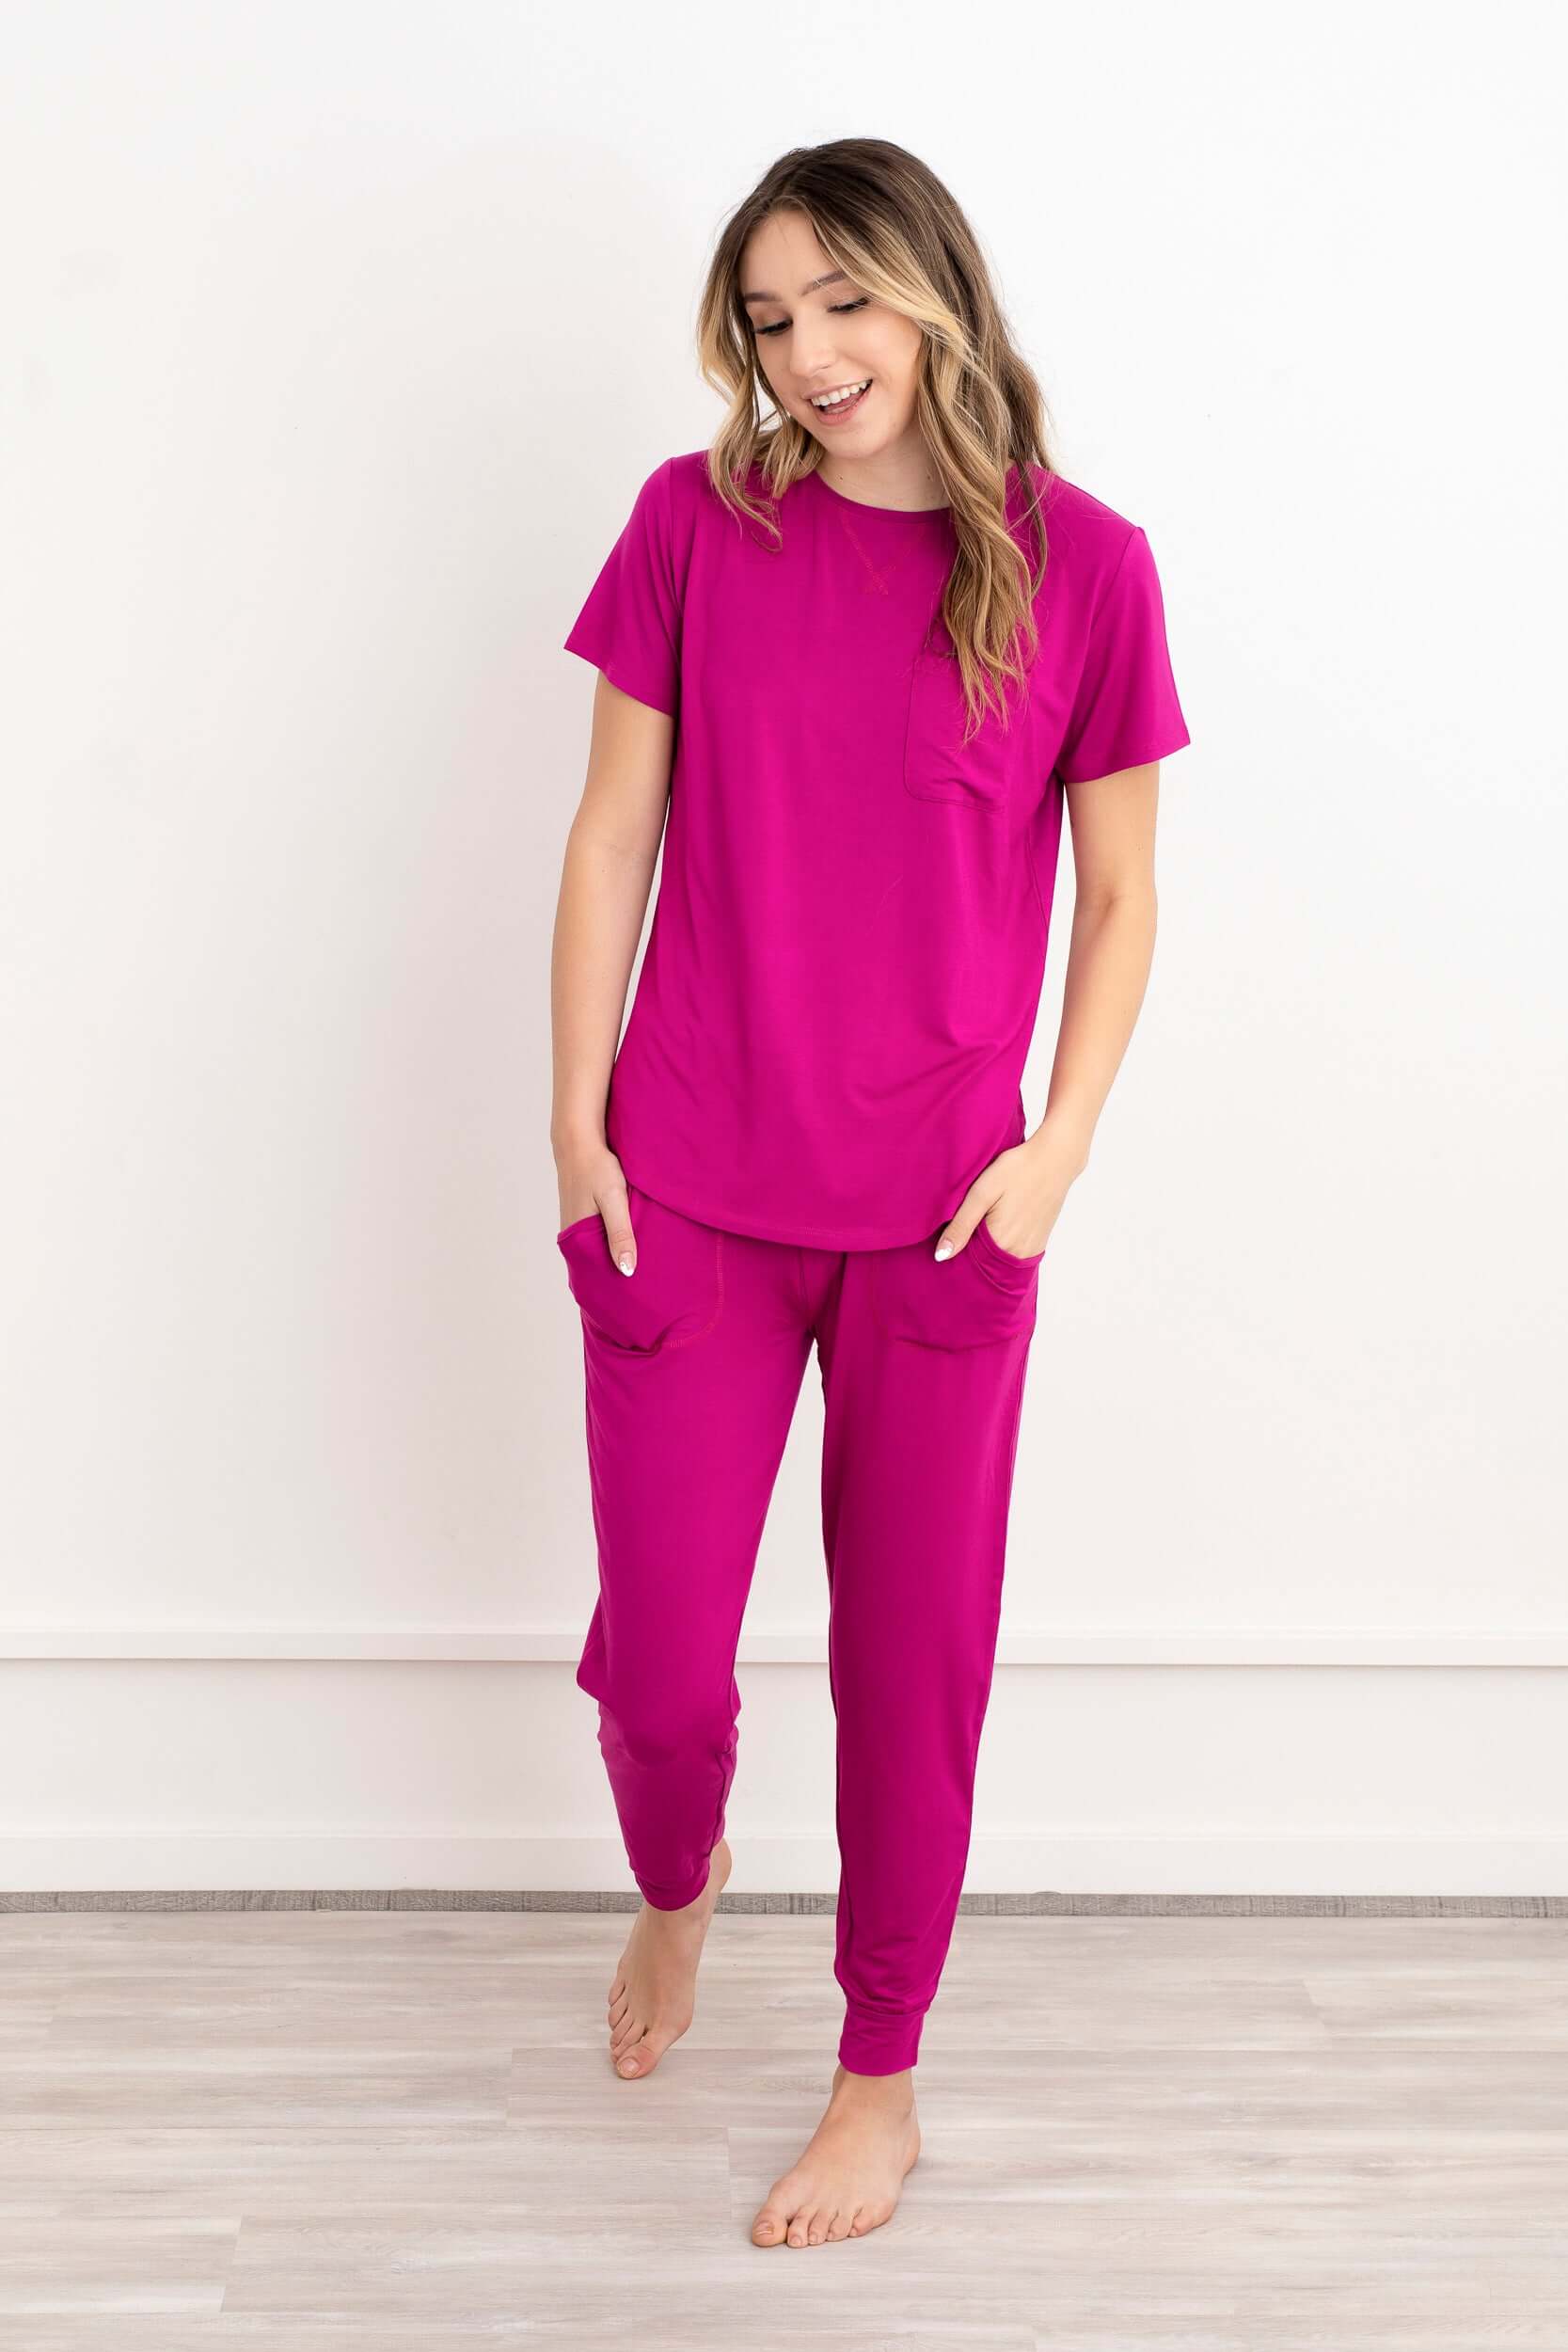 In this photo, a girl exudes casual elegance in our Rosy Pink Modal Short Sleeve and Pants Pajama Set. The soft, breathable fabric drapes gracefully, offering both comfort and style. The cool rosy hue adds a touch of sophistication to her relaxed ensemble